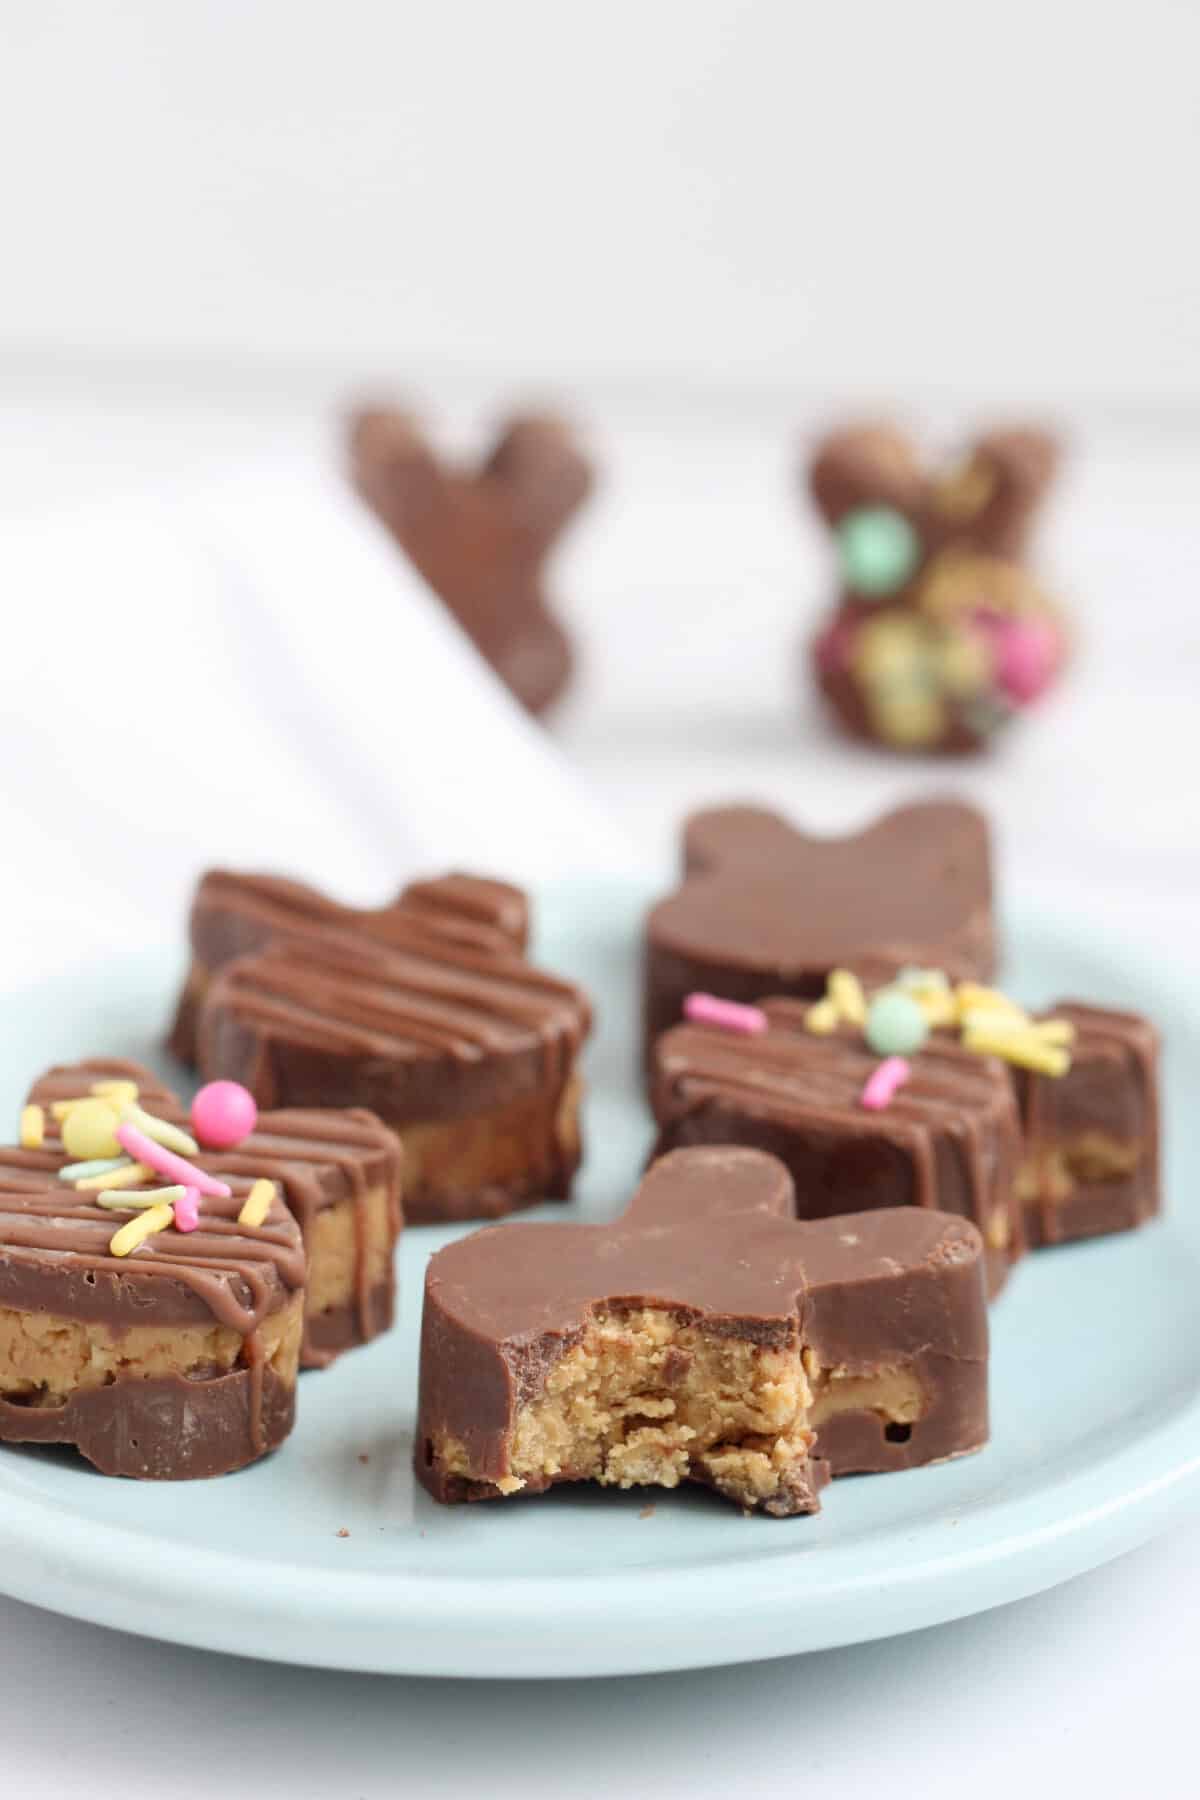 peanut butter cup bunnies on a blue plate with a bite of one of the bunnies